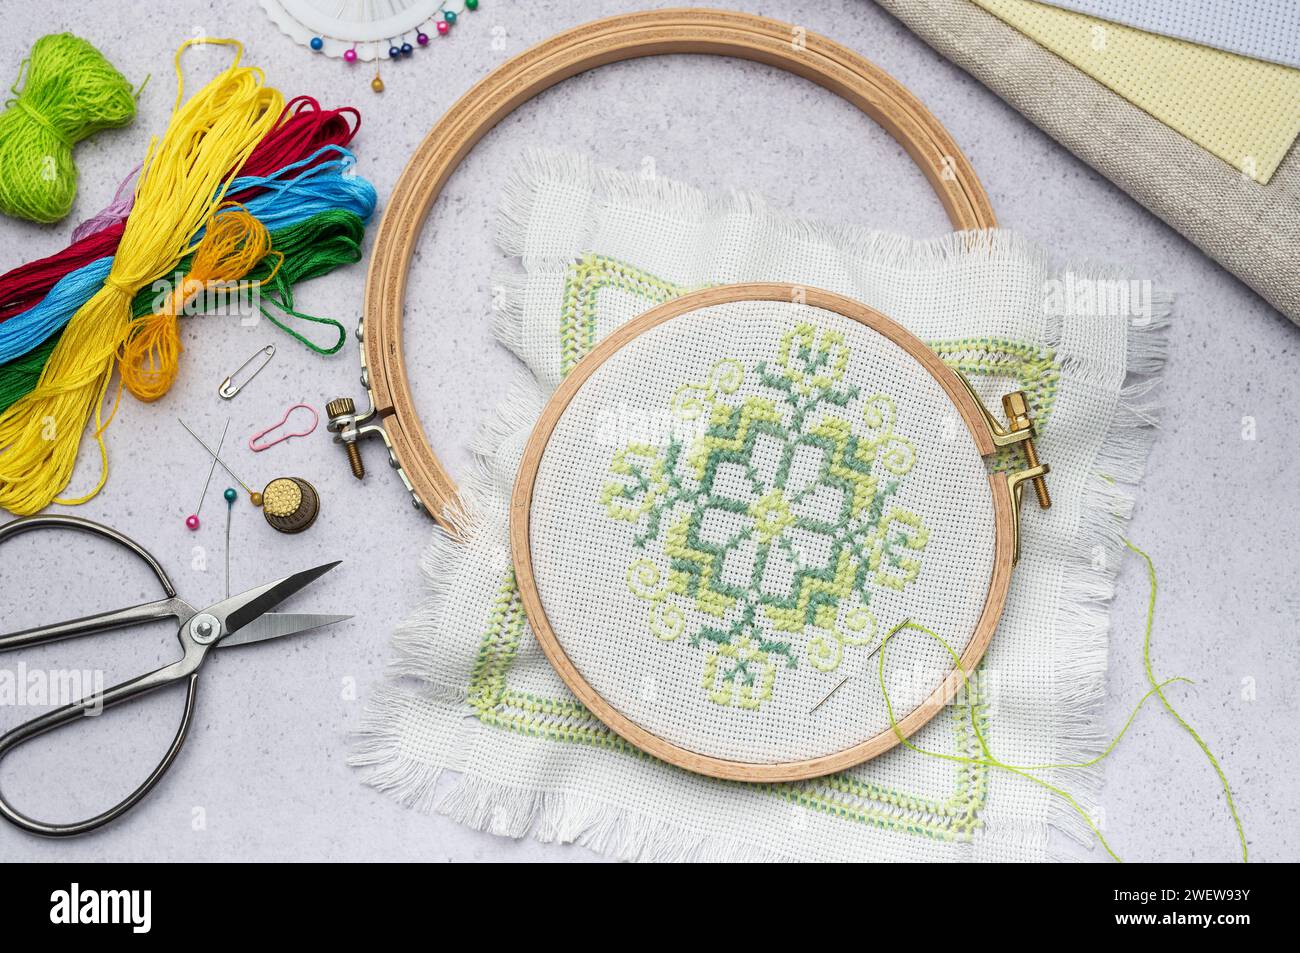 Embroidery with colored threads and various sewing accessories on the table Stock Photo